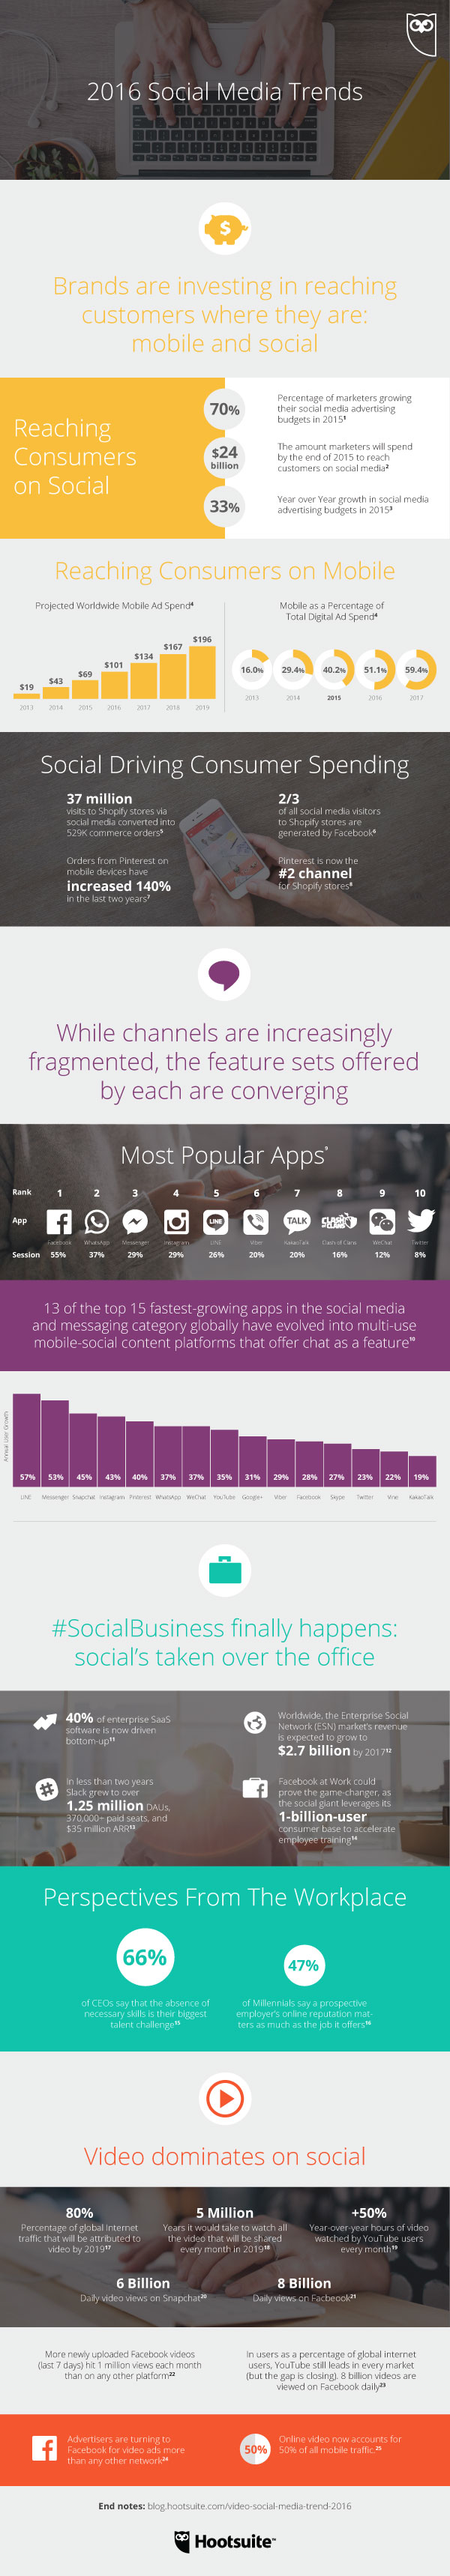 Social Media Trends You Need To Know For 2016 - infographic